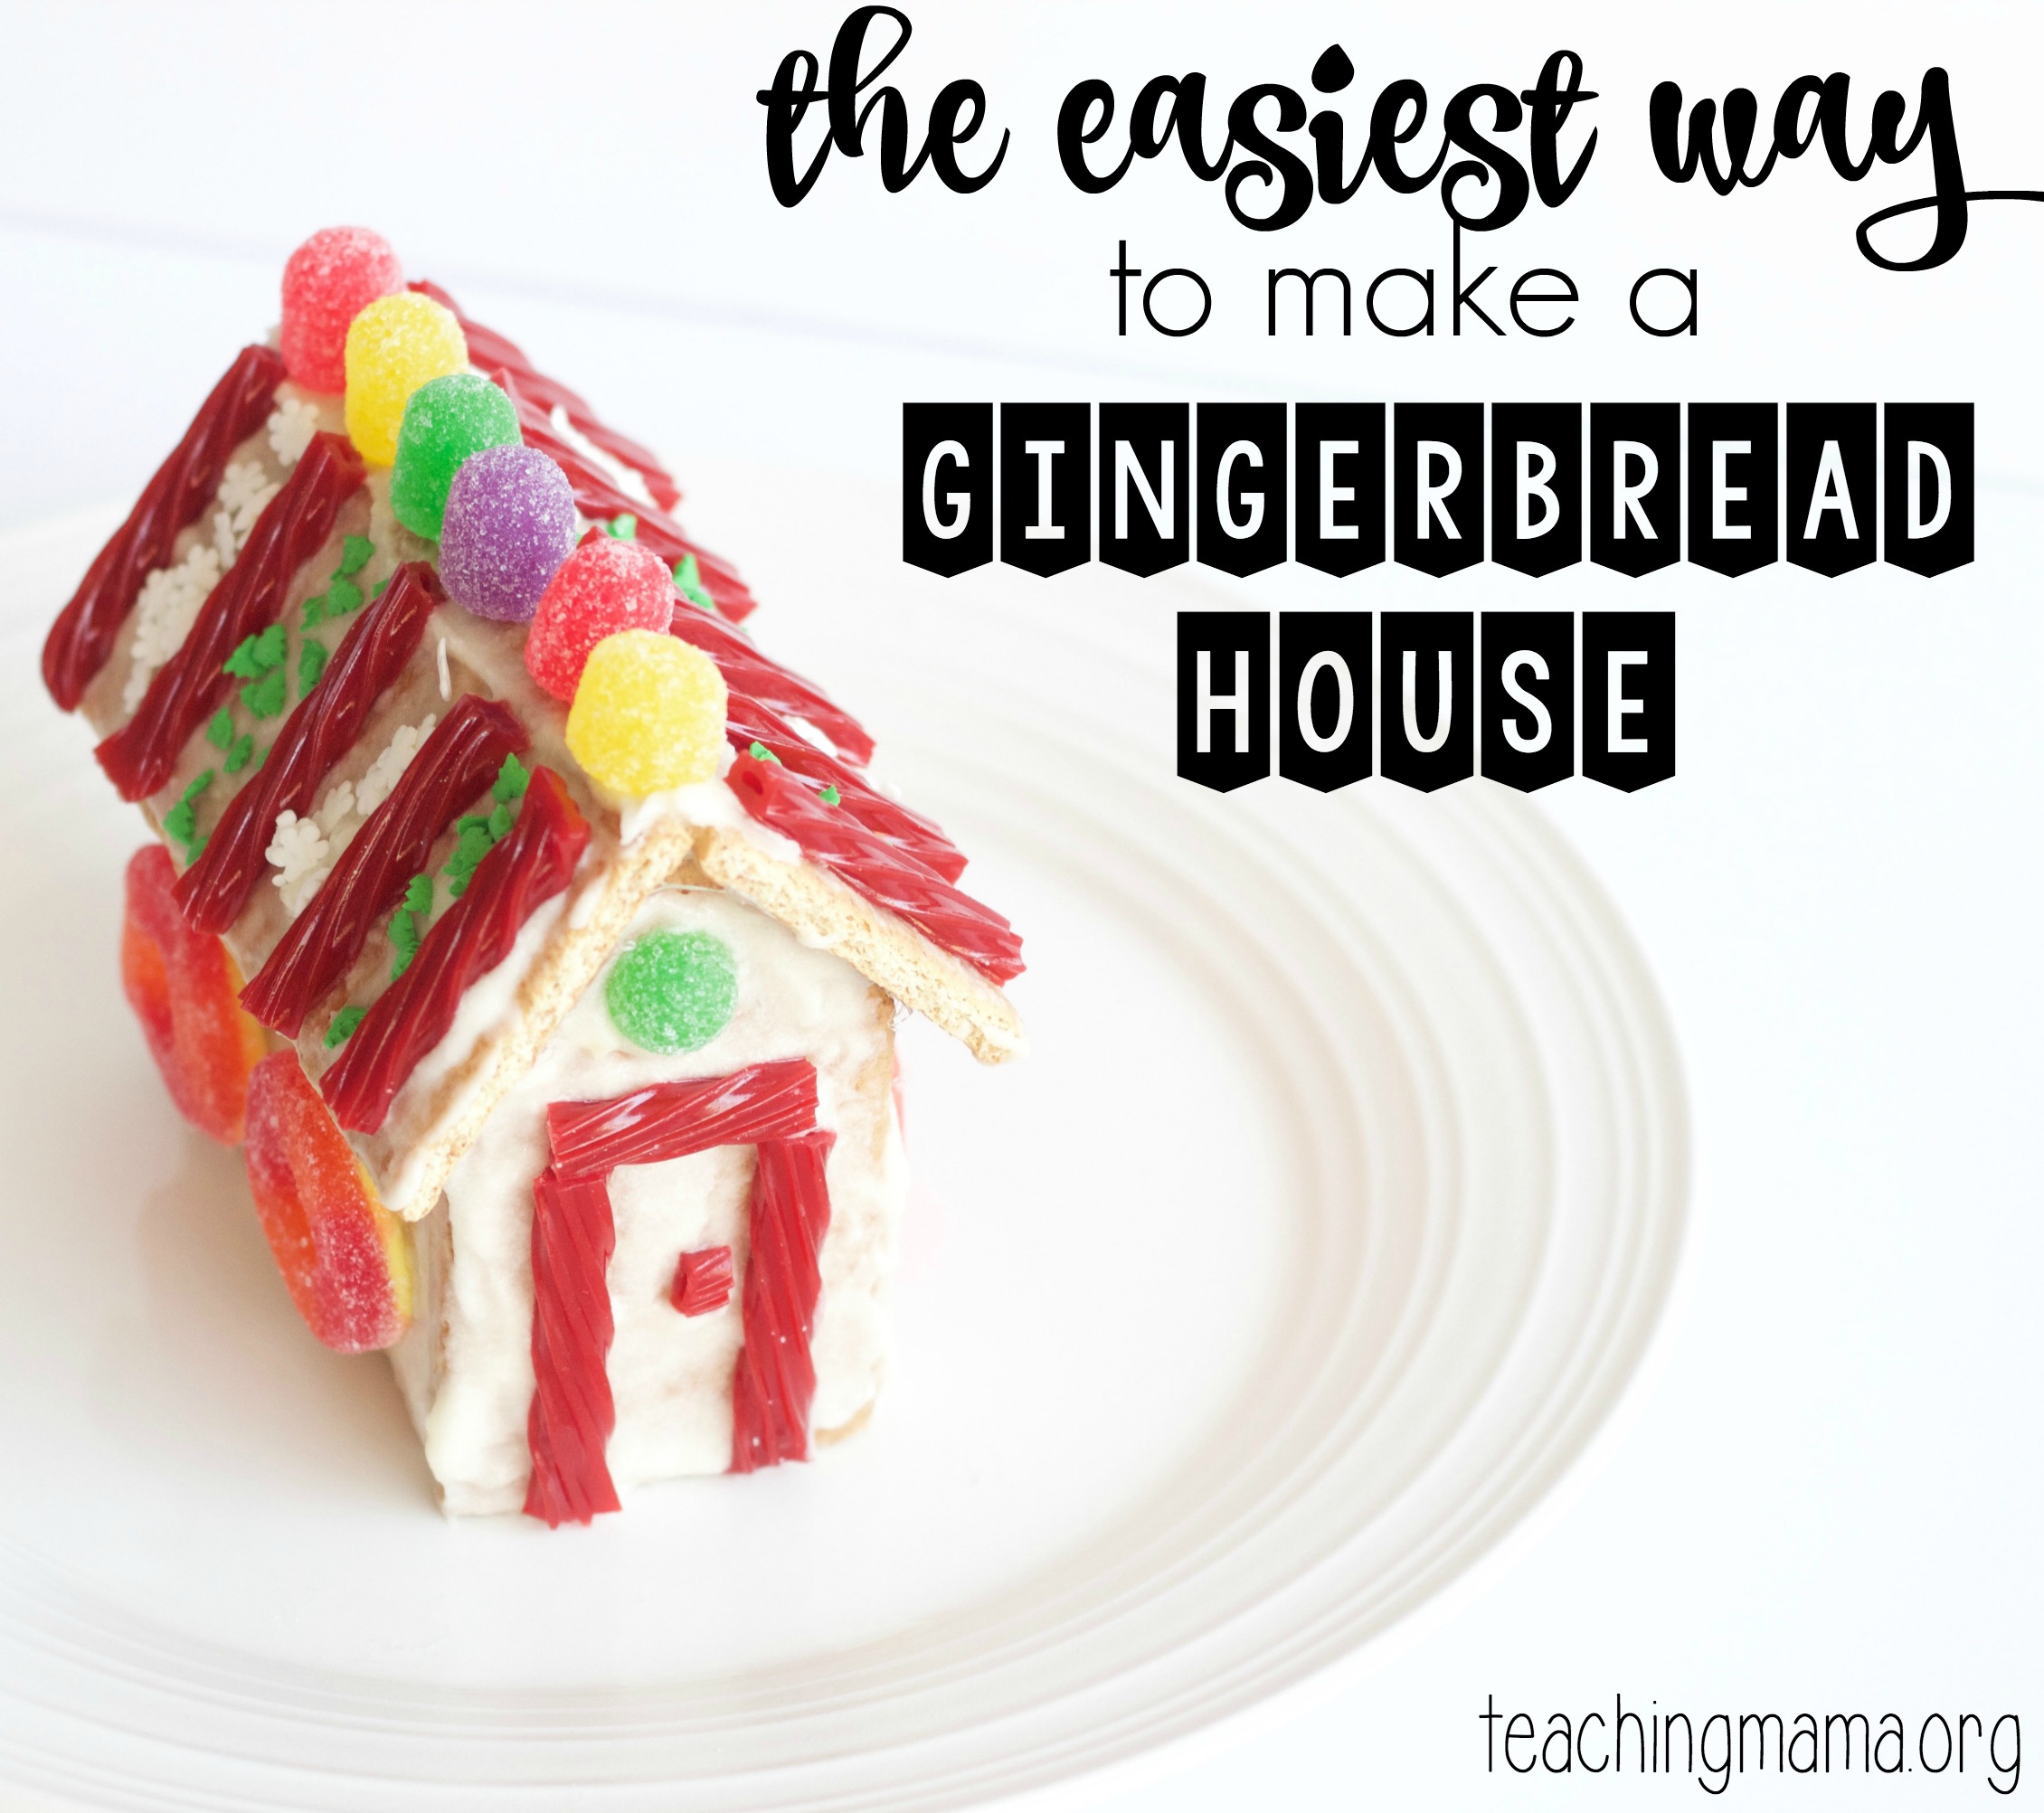 gingerbread-house-fb